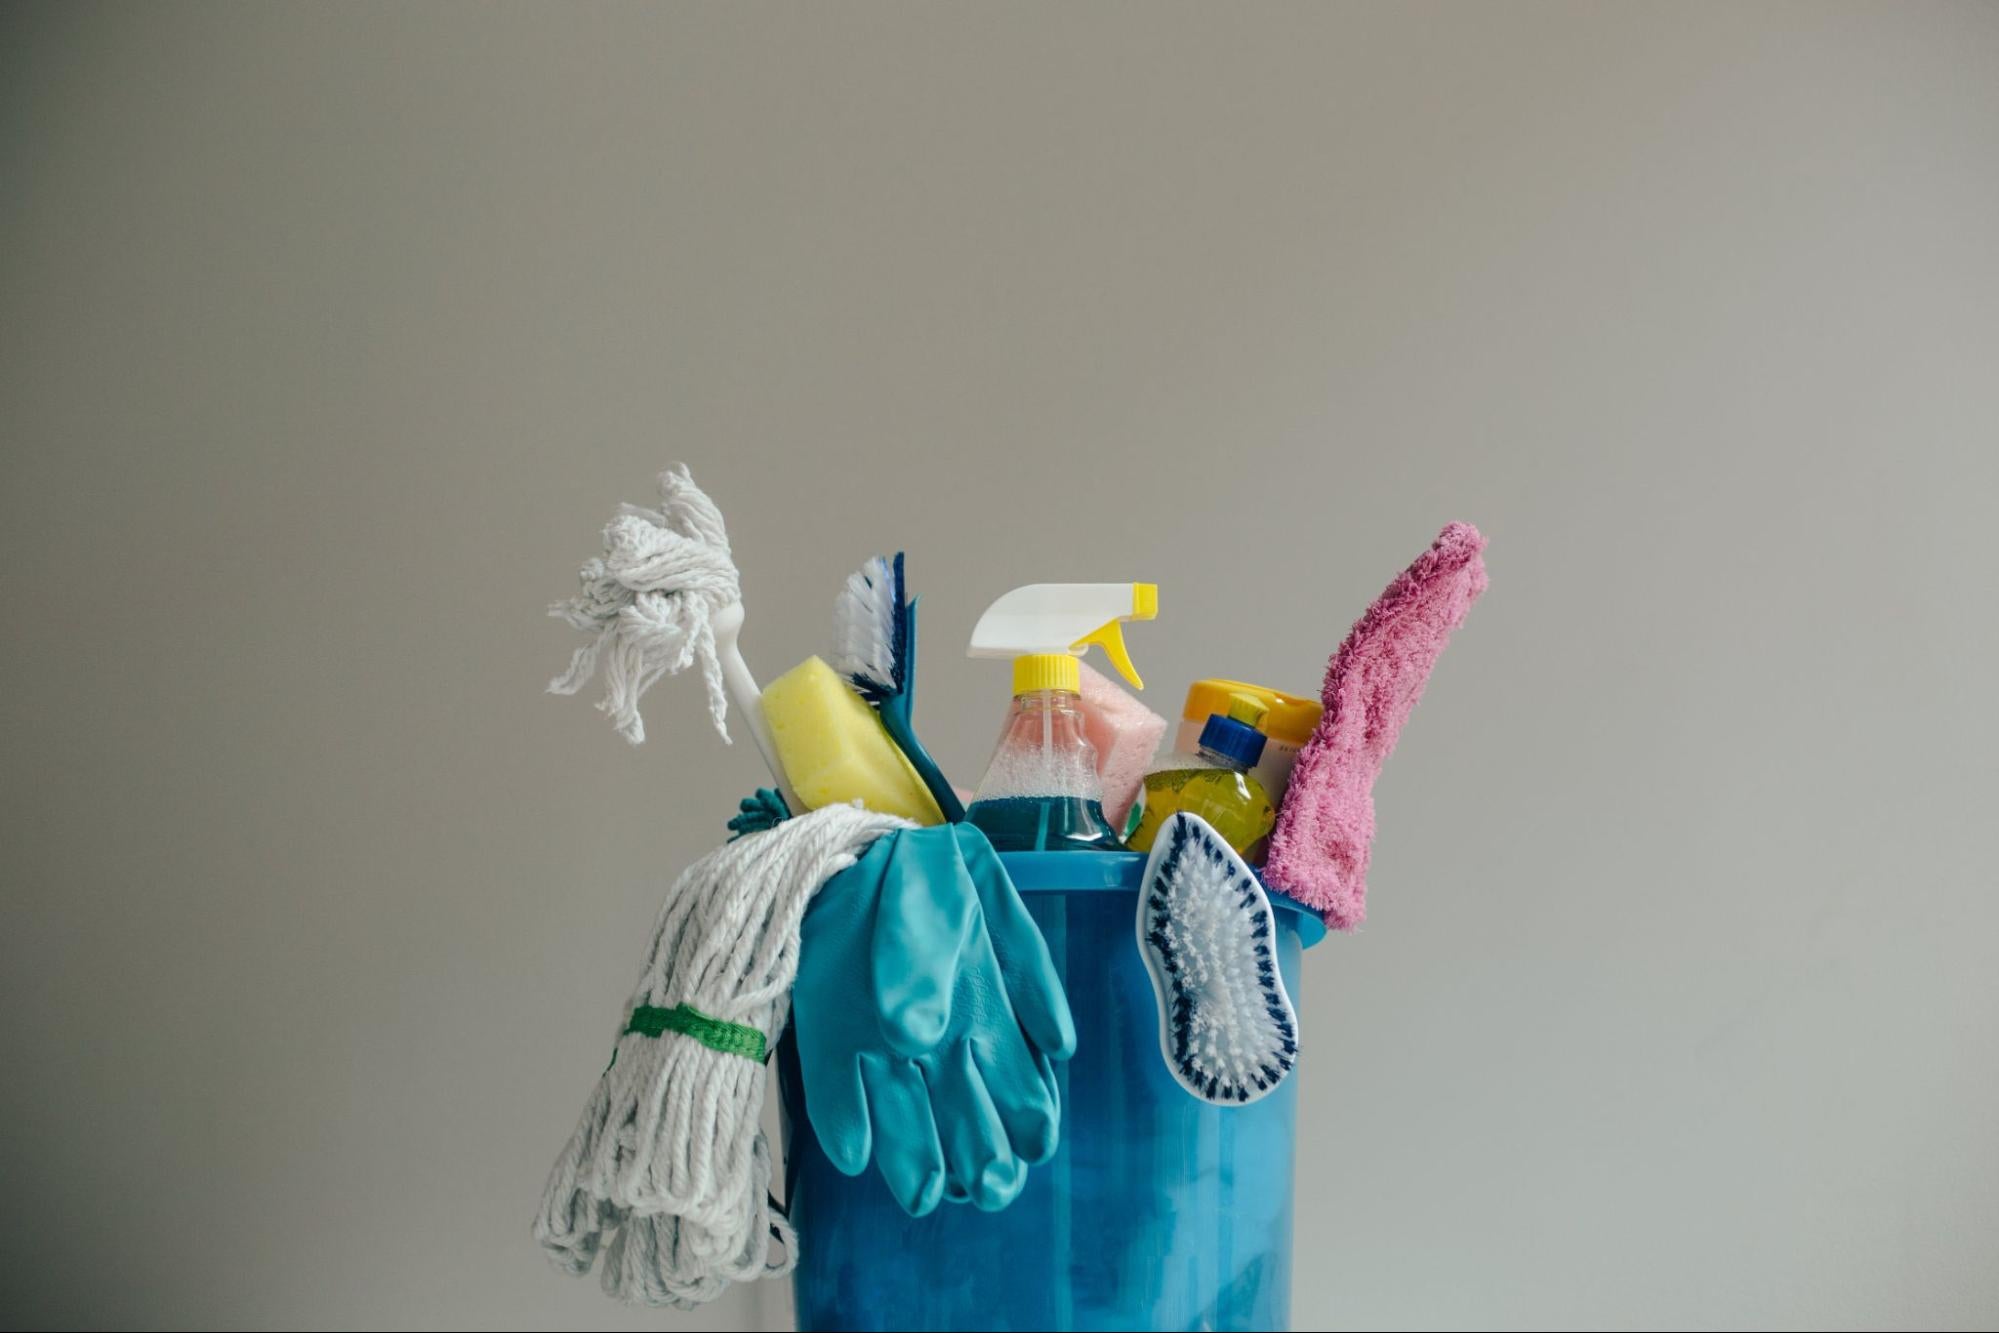 A bucket of cleaning supplies against a gray background.